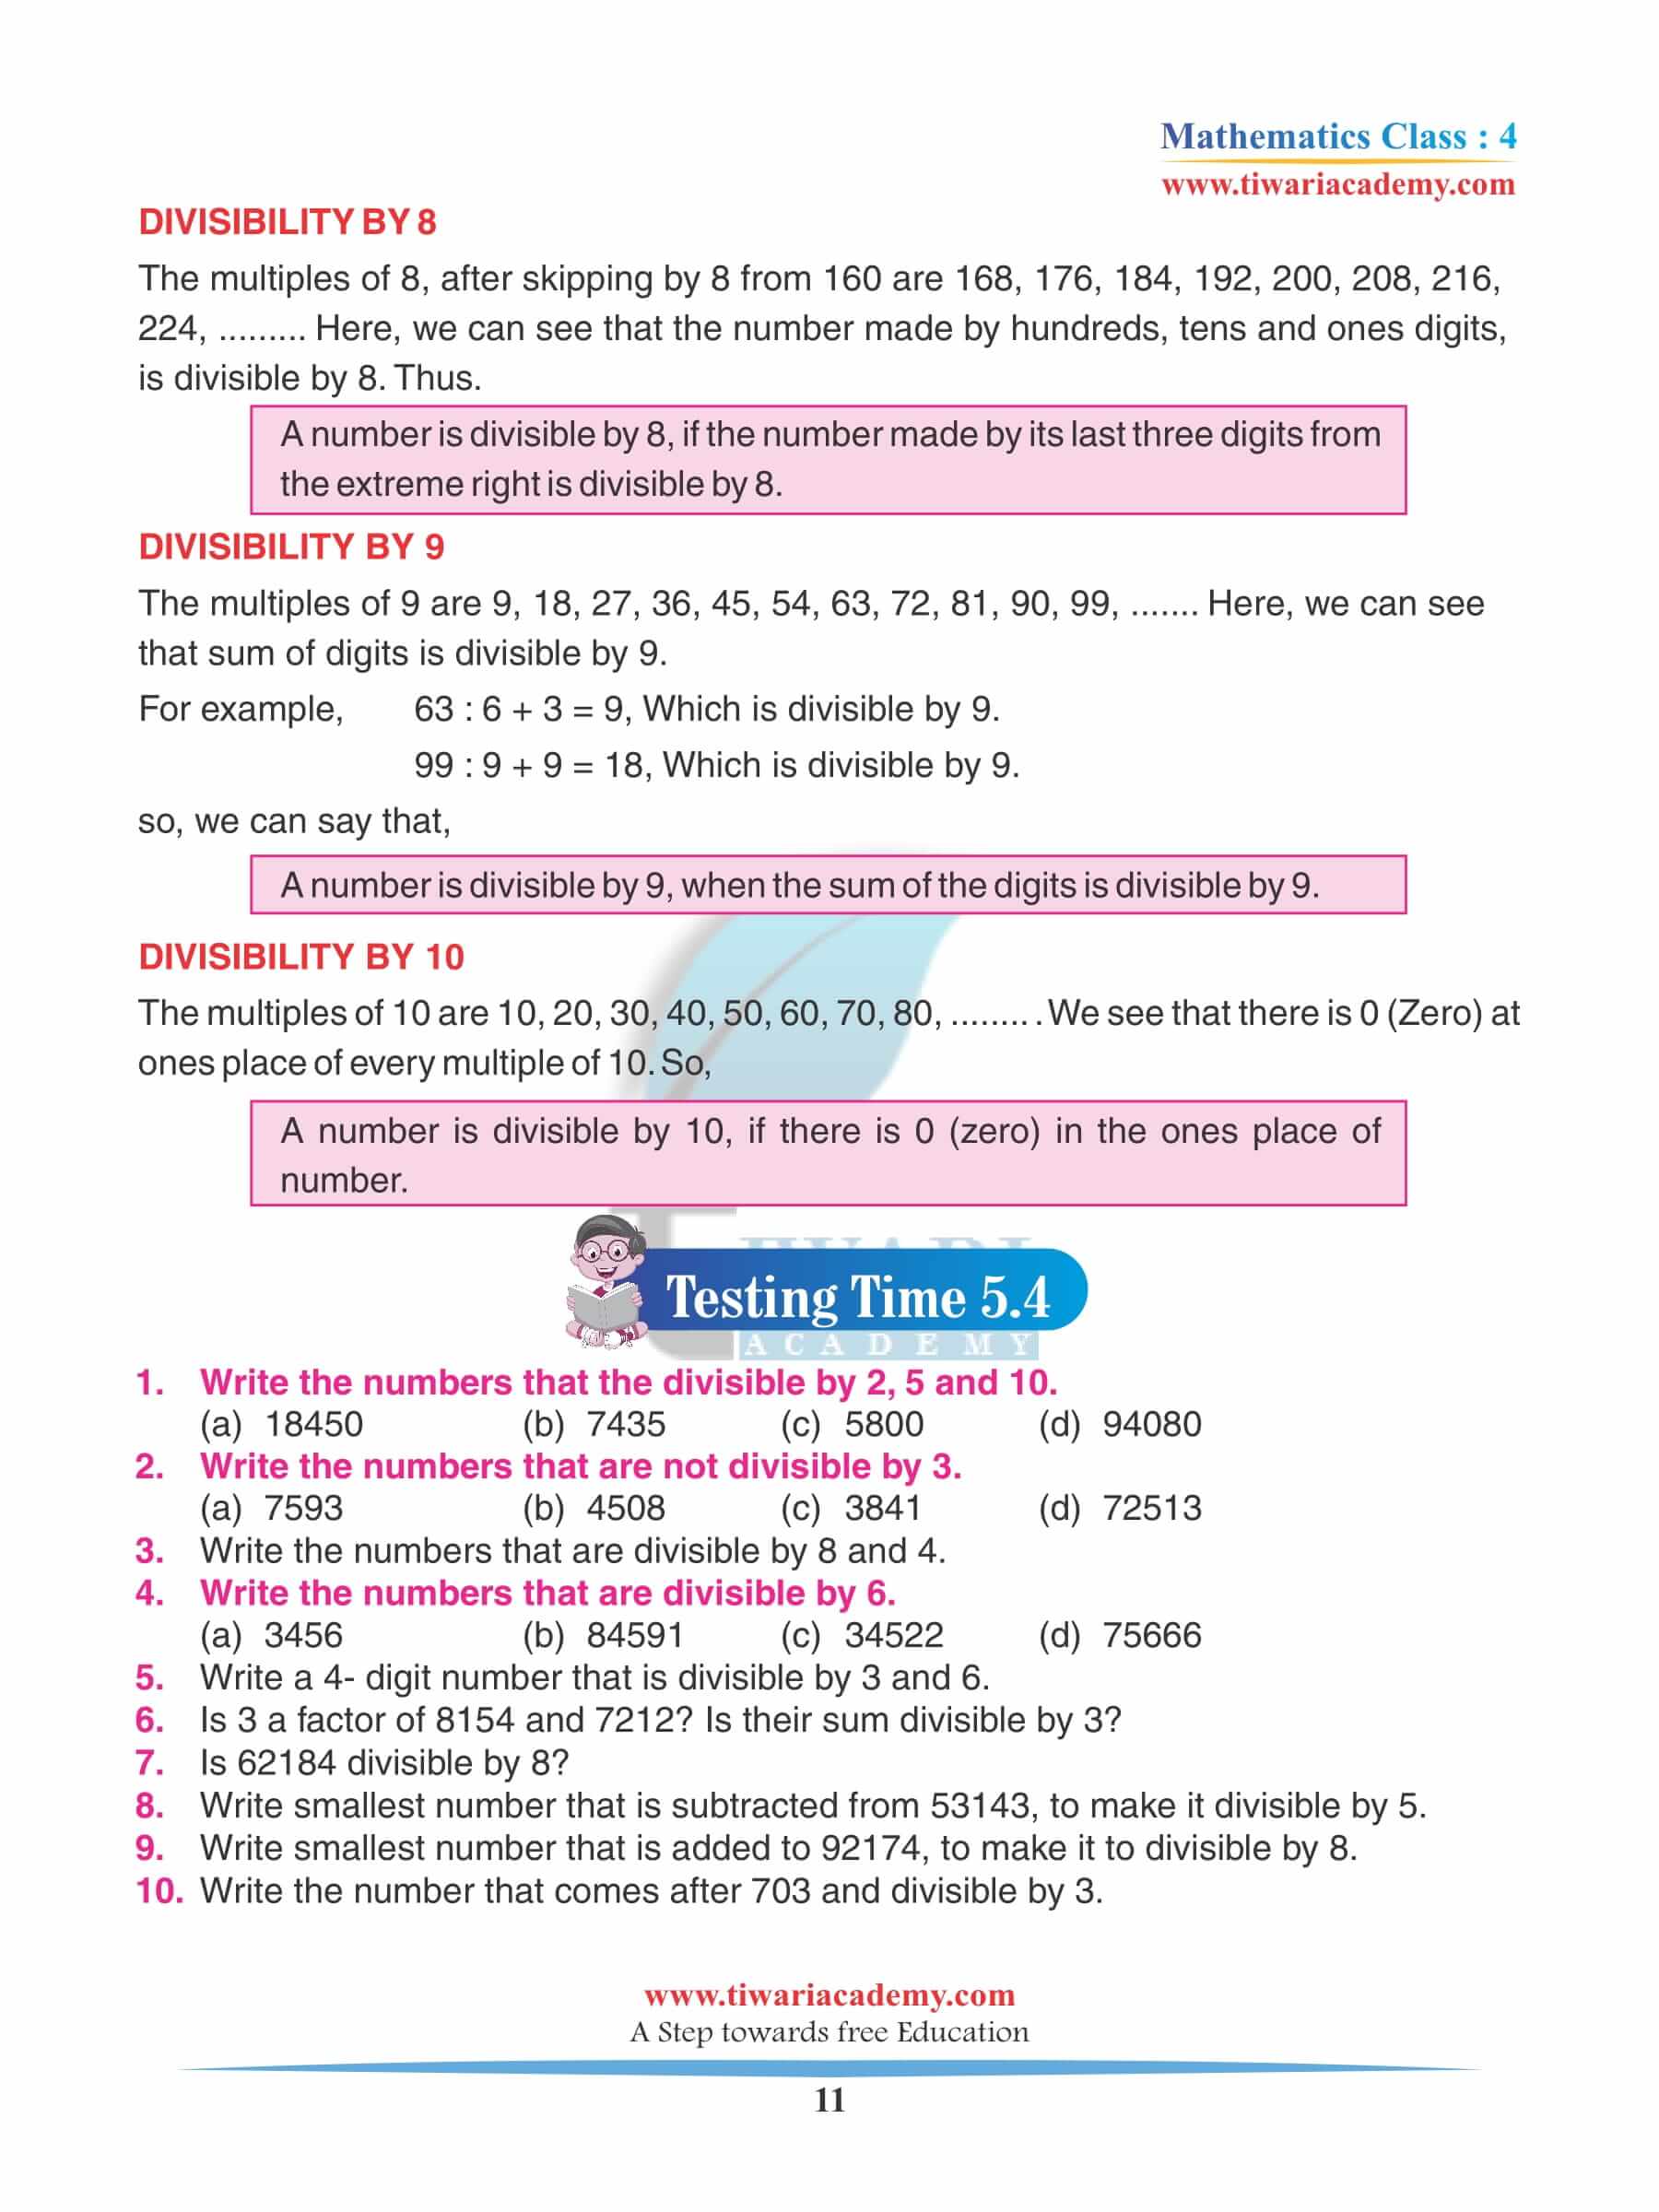 Class 4 Maths Chapter 5 Practice questions answers